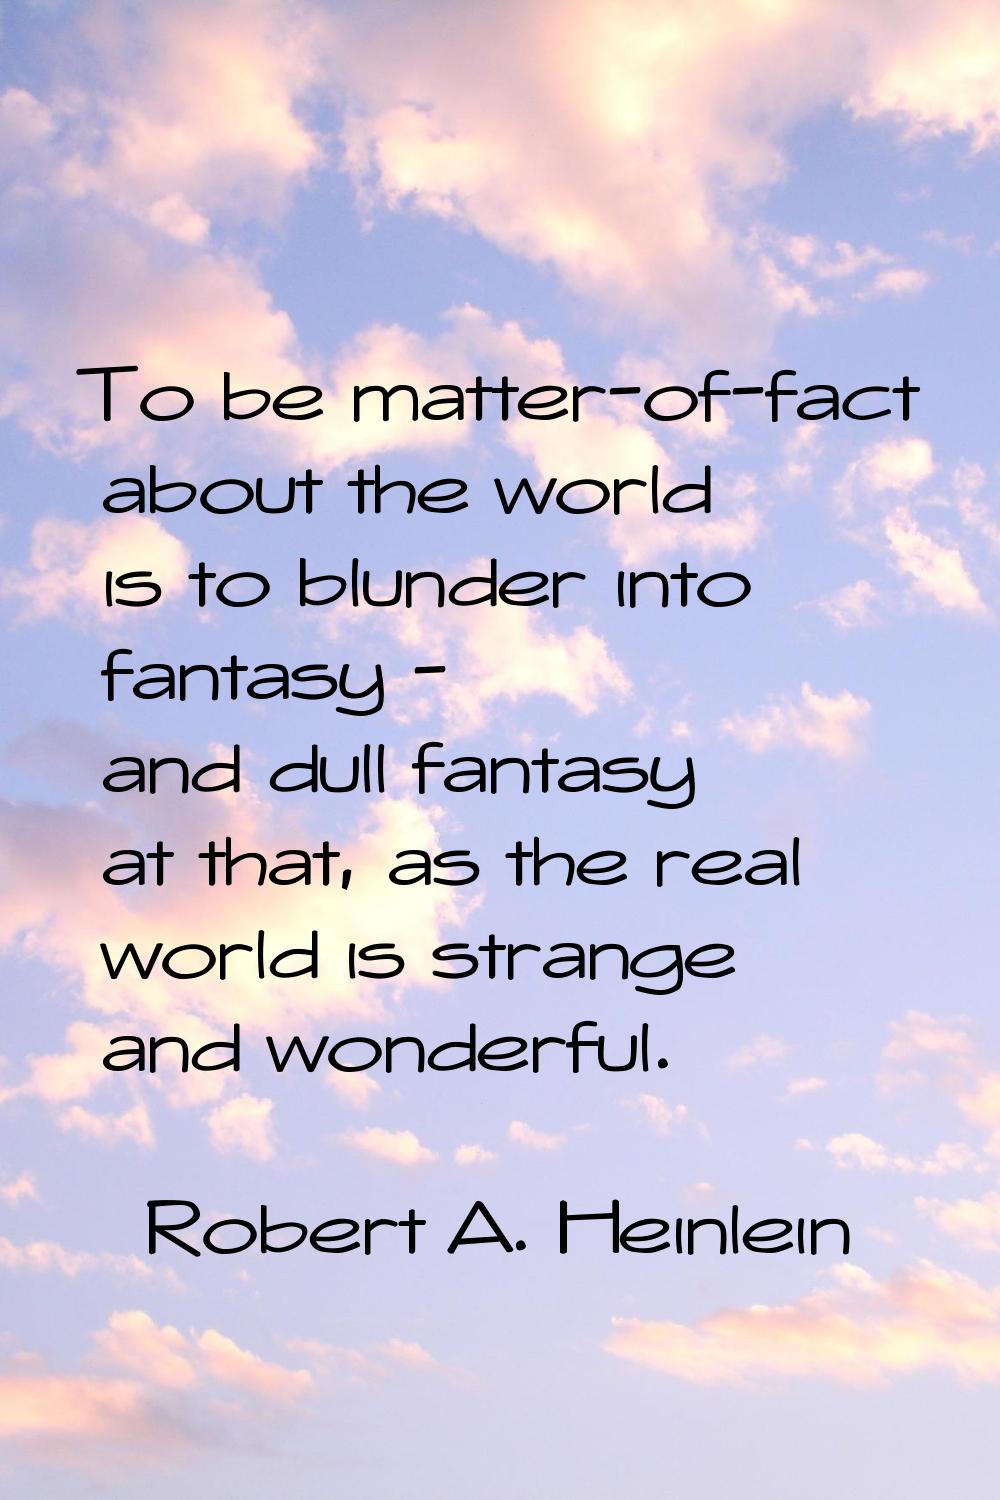 To be matter-of-fact about the world is to blunder into fantasy - and dull fantasy at that, as the 